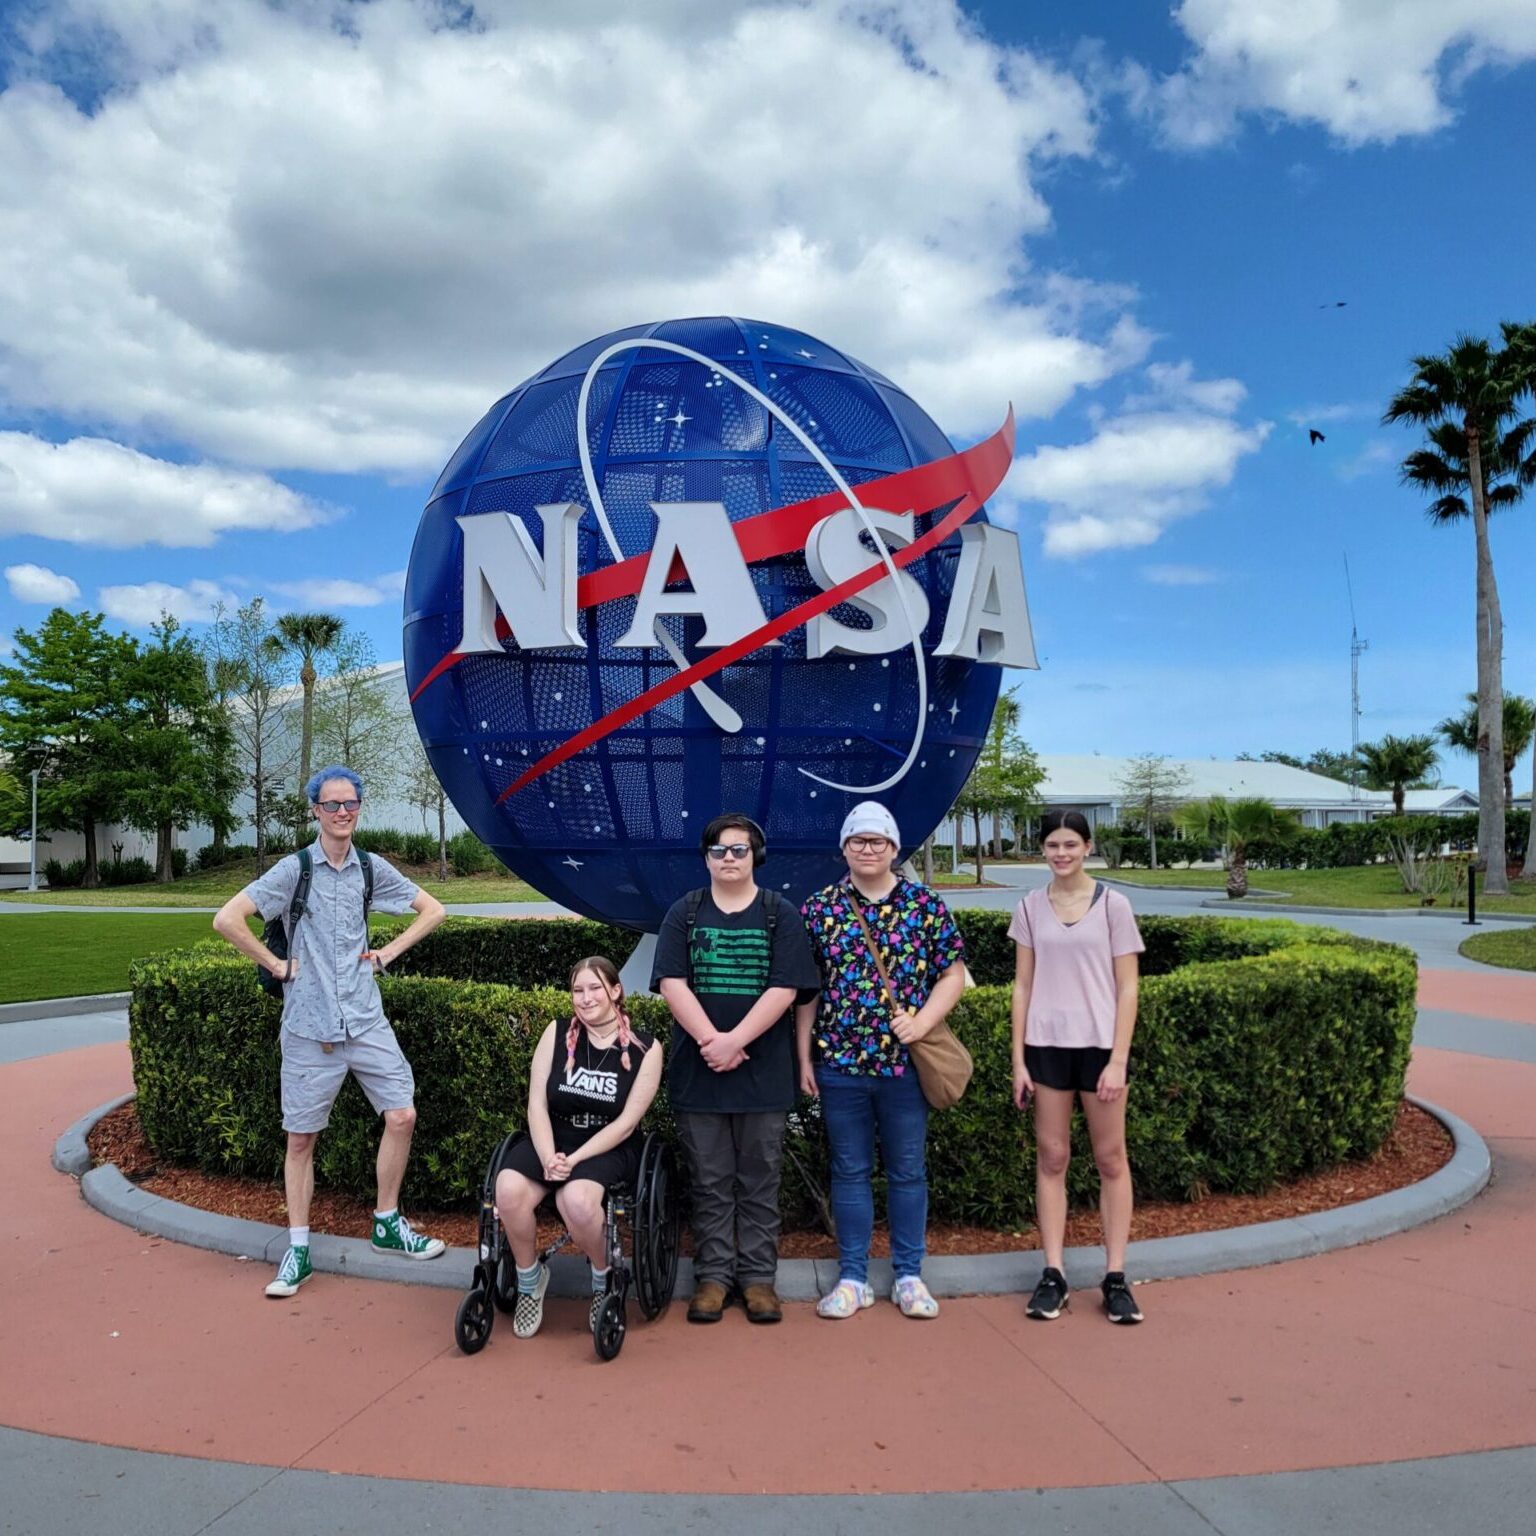 Phoenix, Olie, Cameron, Vivian, and Lilly in front of the NASA "meatball" sculpture outside Kennedy Space Center.